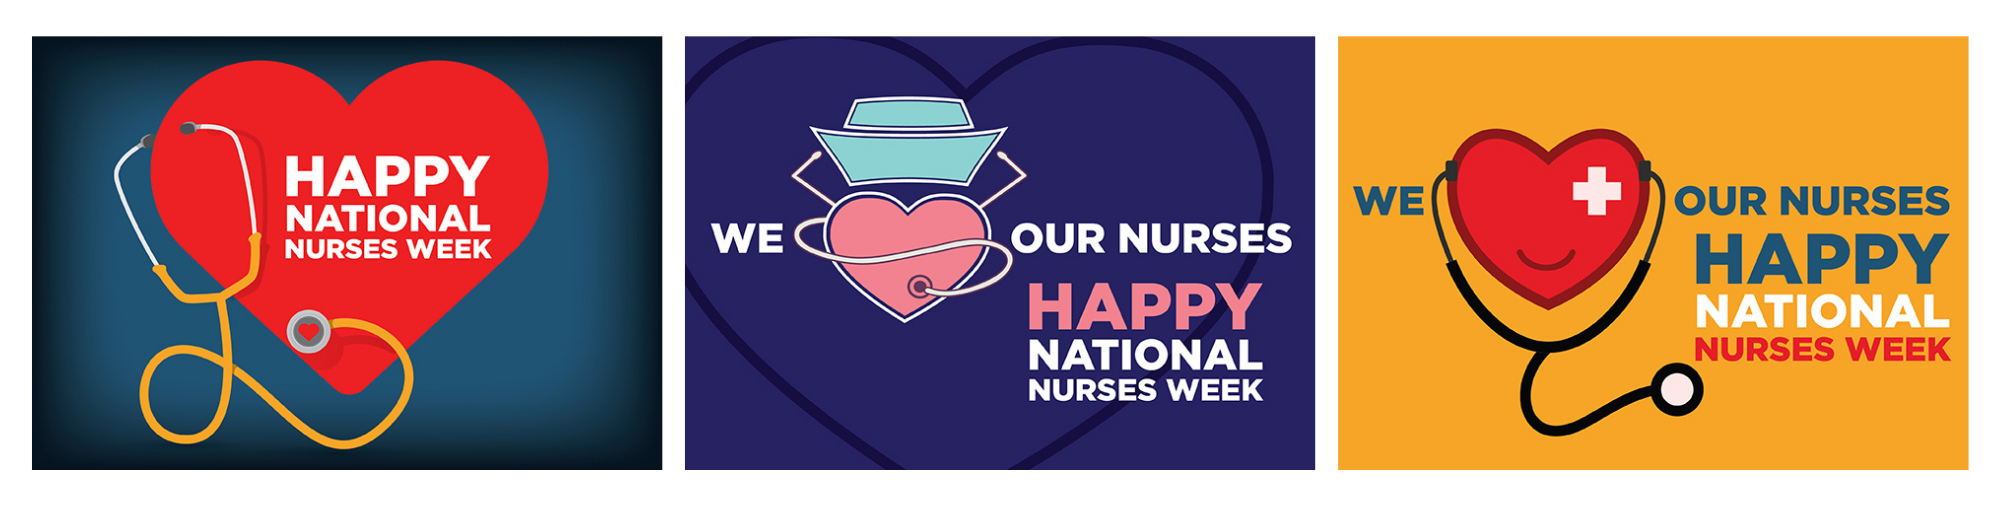 recognition-ecards-for-national-nurses-and-hospital-weeks-c-a-short